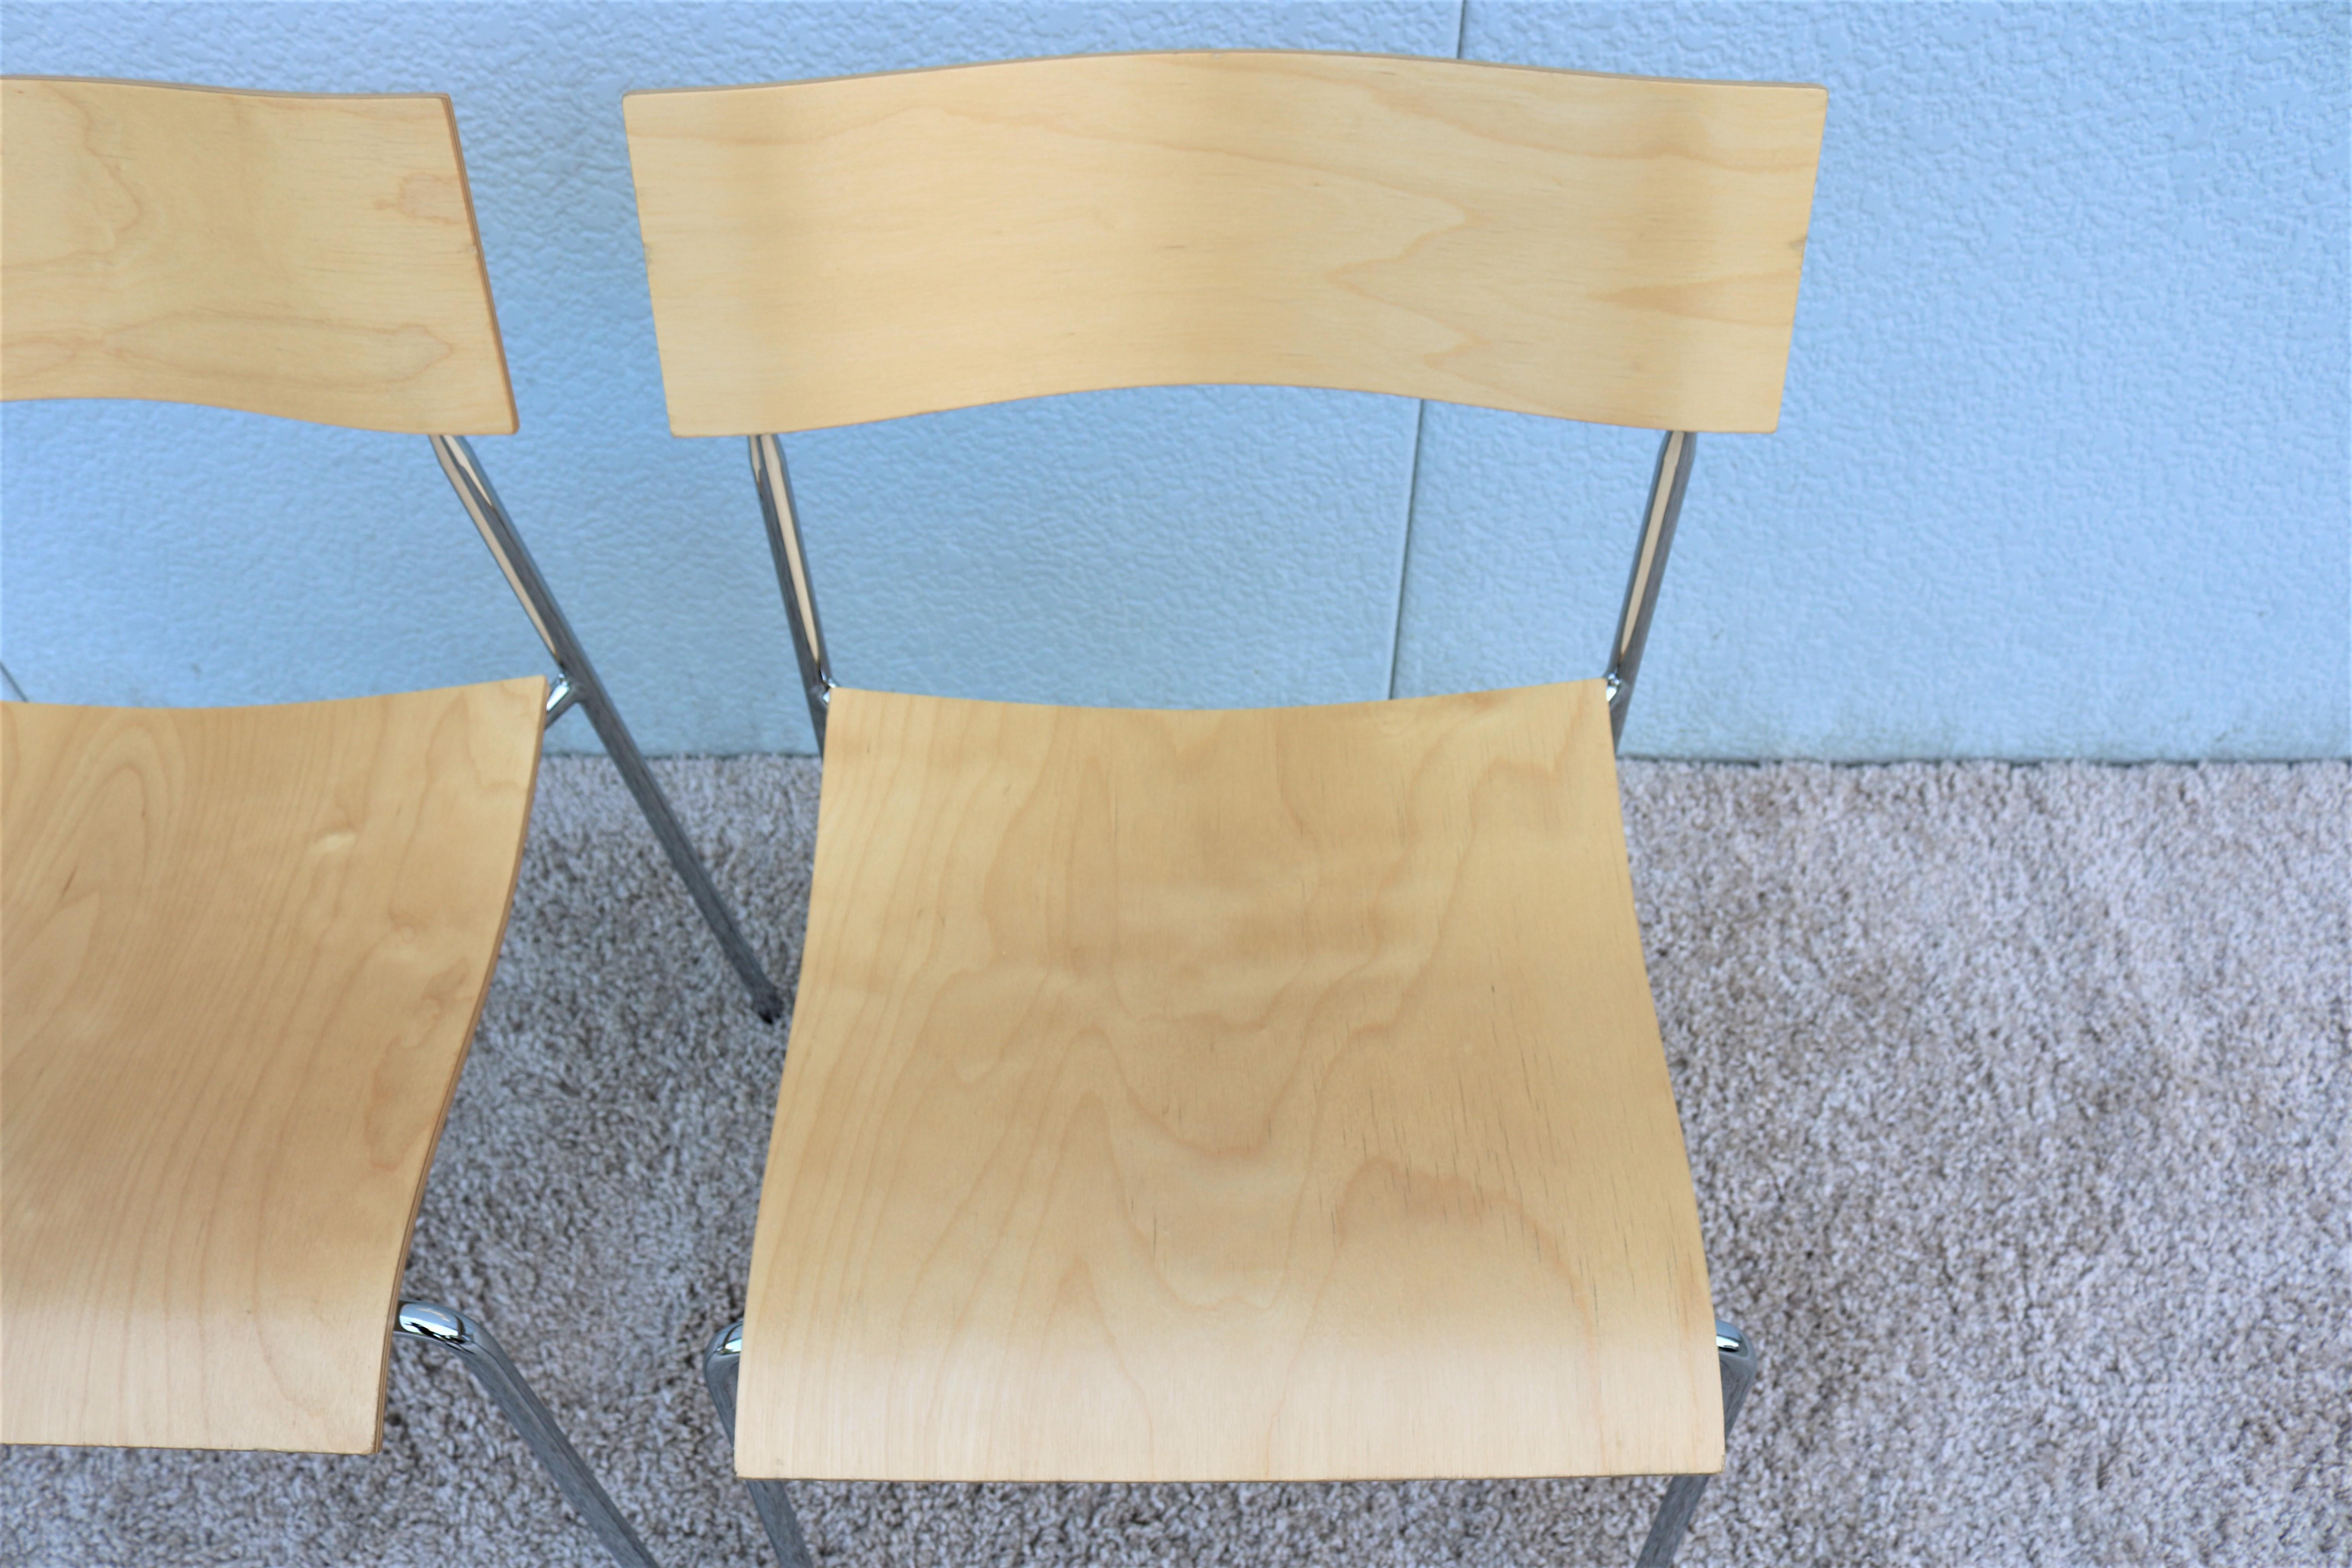 1992 Sweden Modern Campus AB Chairs by Johannes Foersom for Lammhults, a Pair For Sale 3